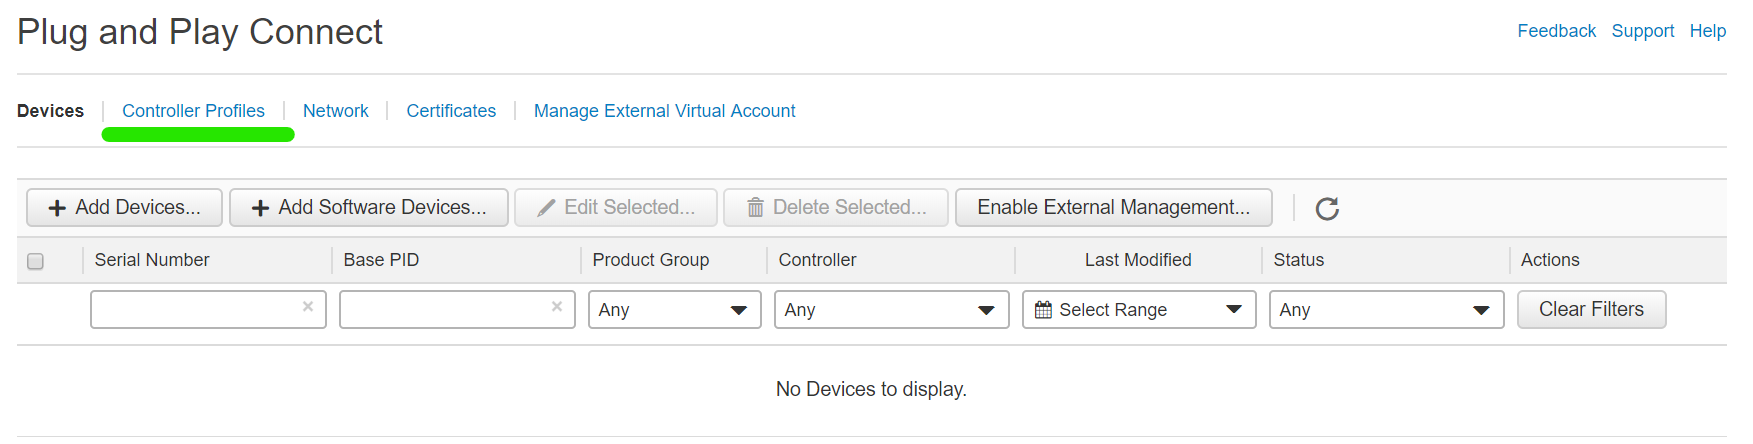 blog/cisco-sdwan-self-hosted-lab-part-1/virtual-account-7.png